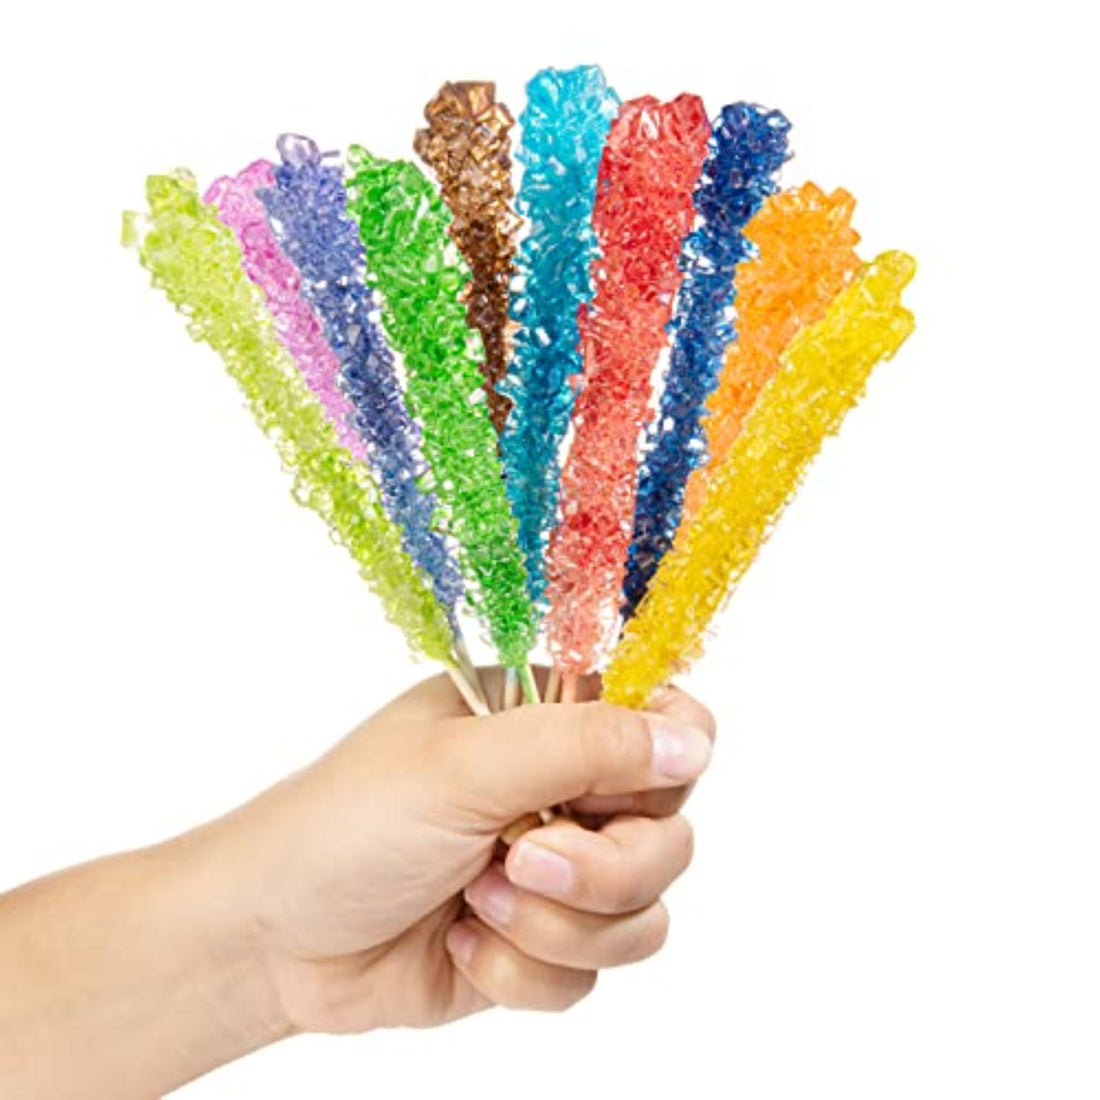 'Thank You' 36 ct Rock Candy Crystal Sticks